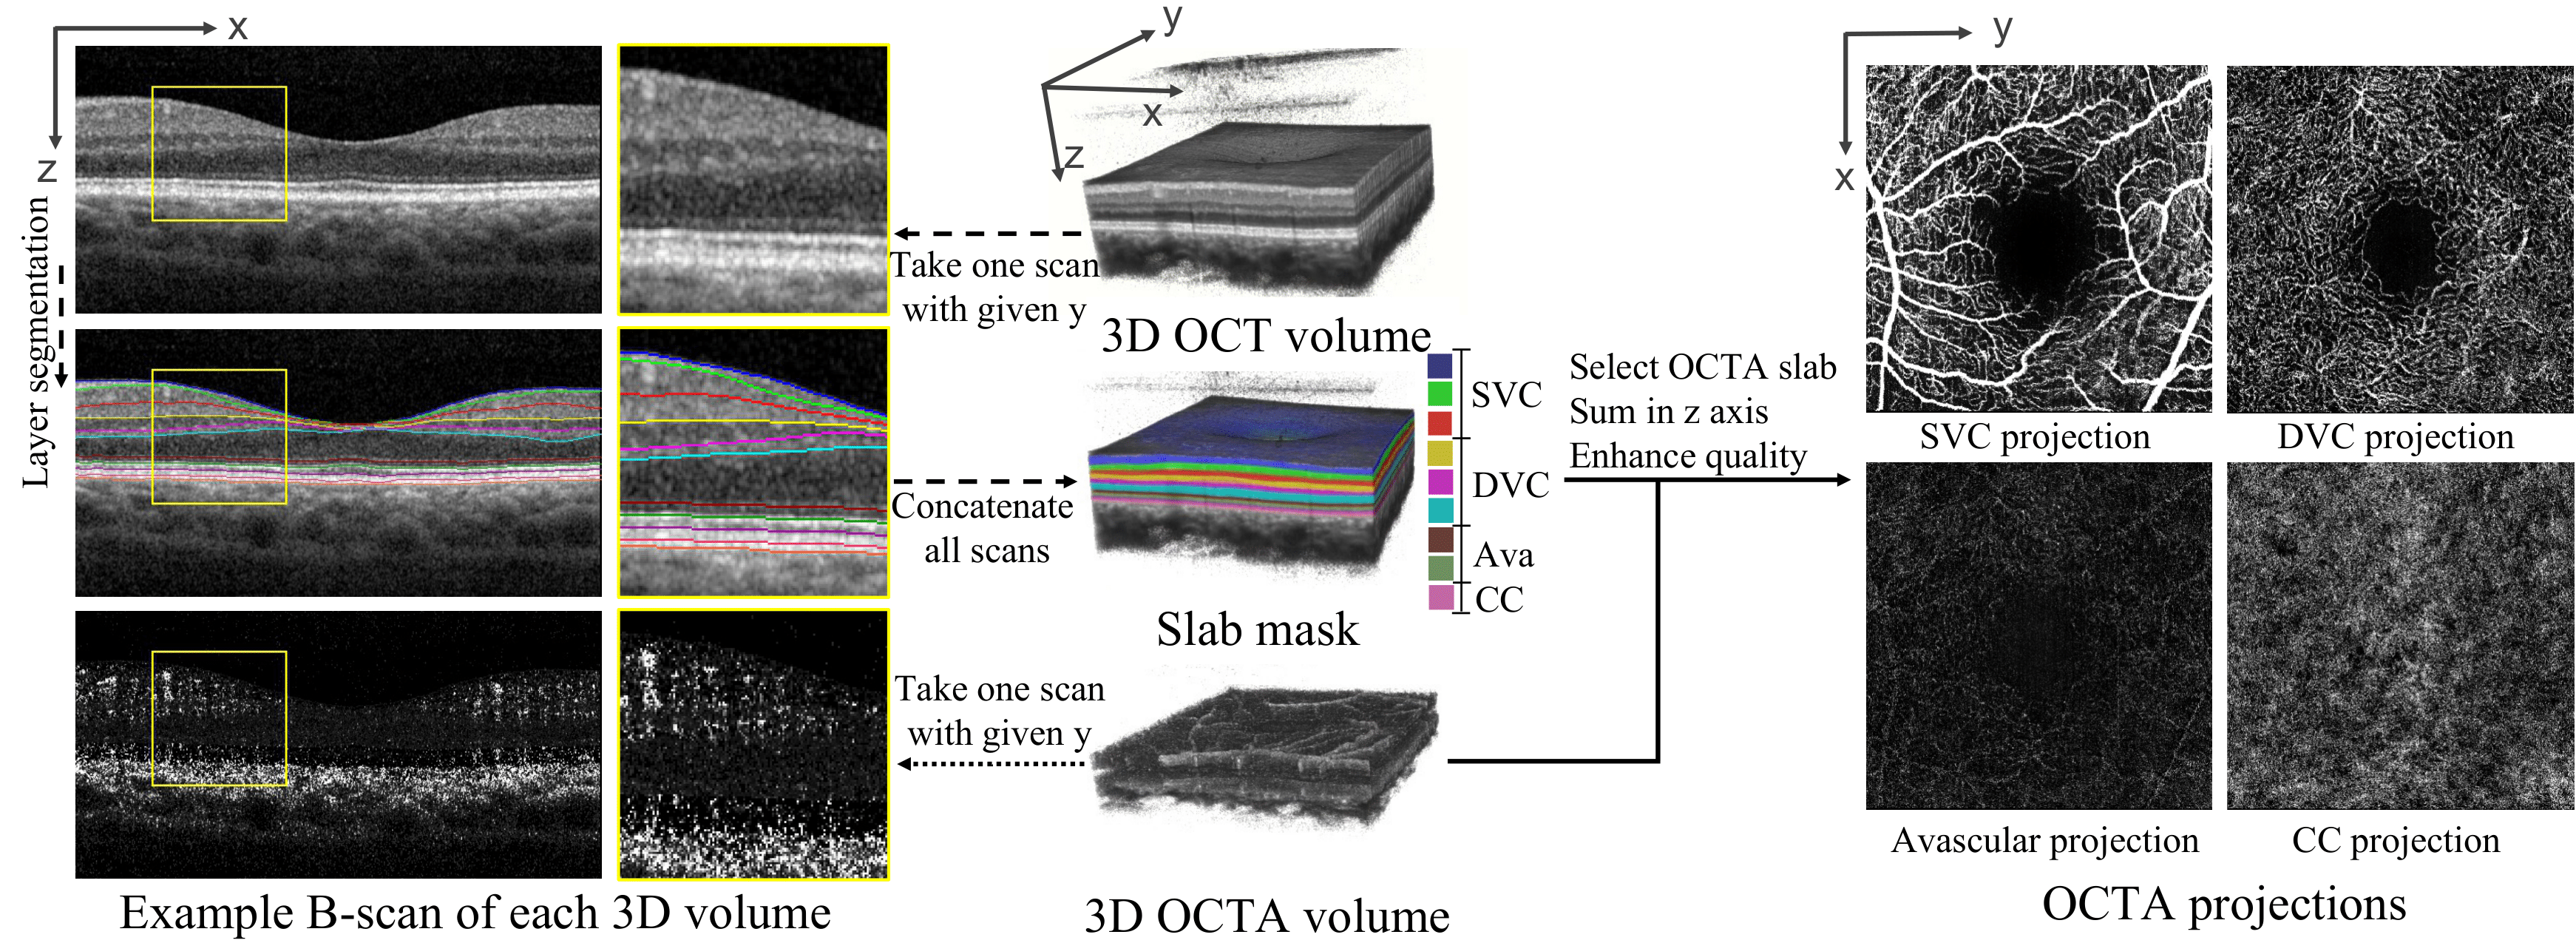 Interrelationships among OCT and OCTA raw volume, B-scans, and OCTA projection. OCT B-Scan layer segmentation influences OCTA projection generation.